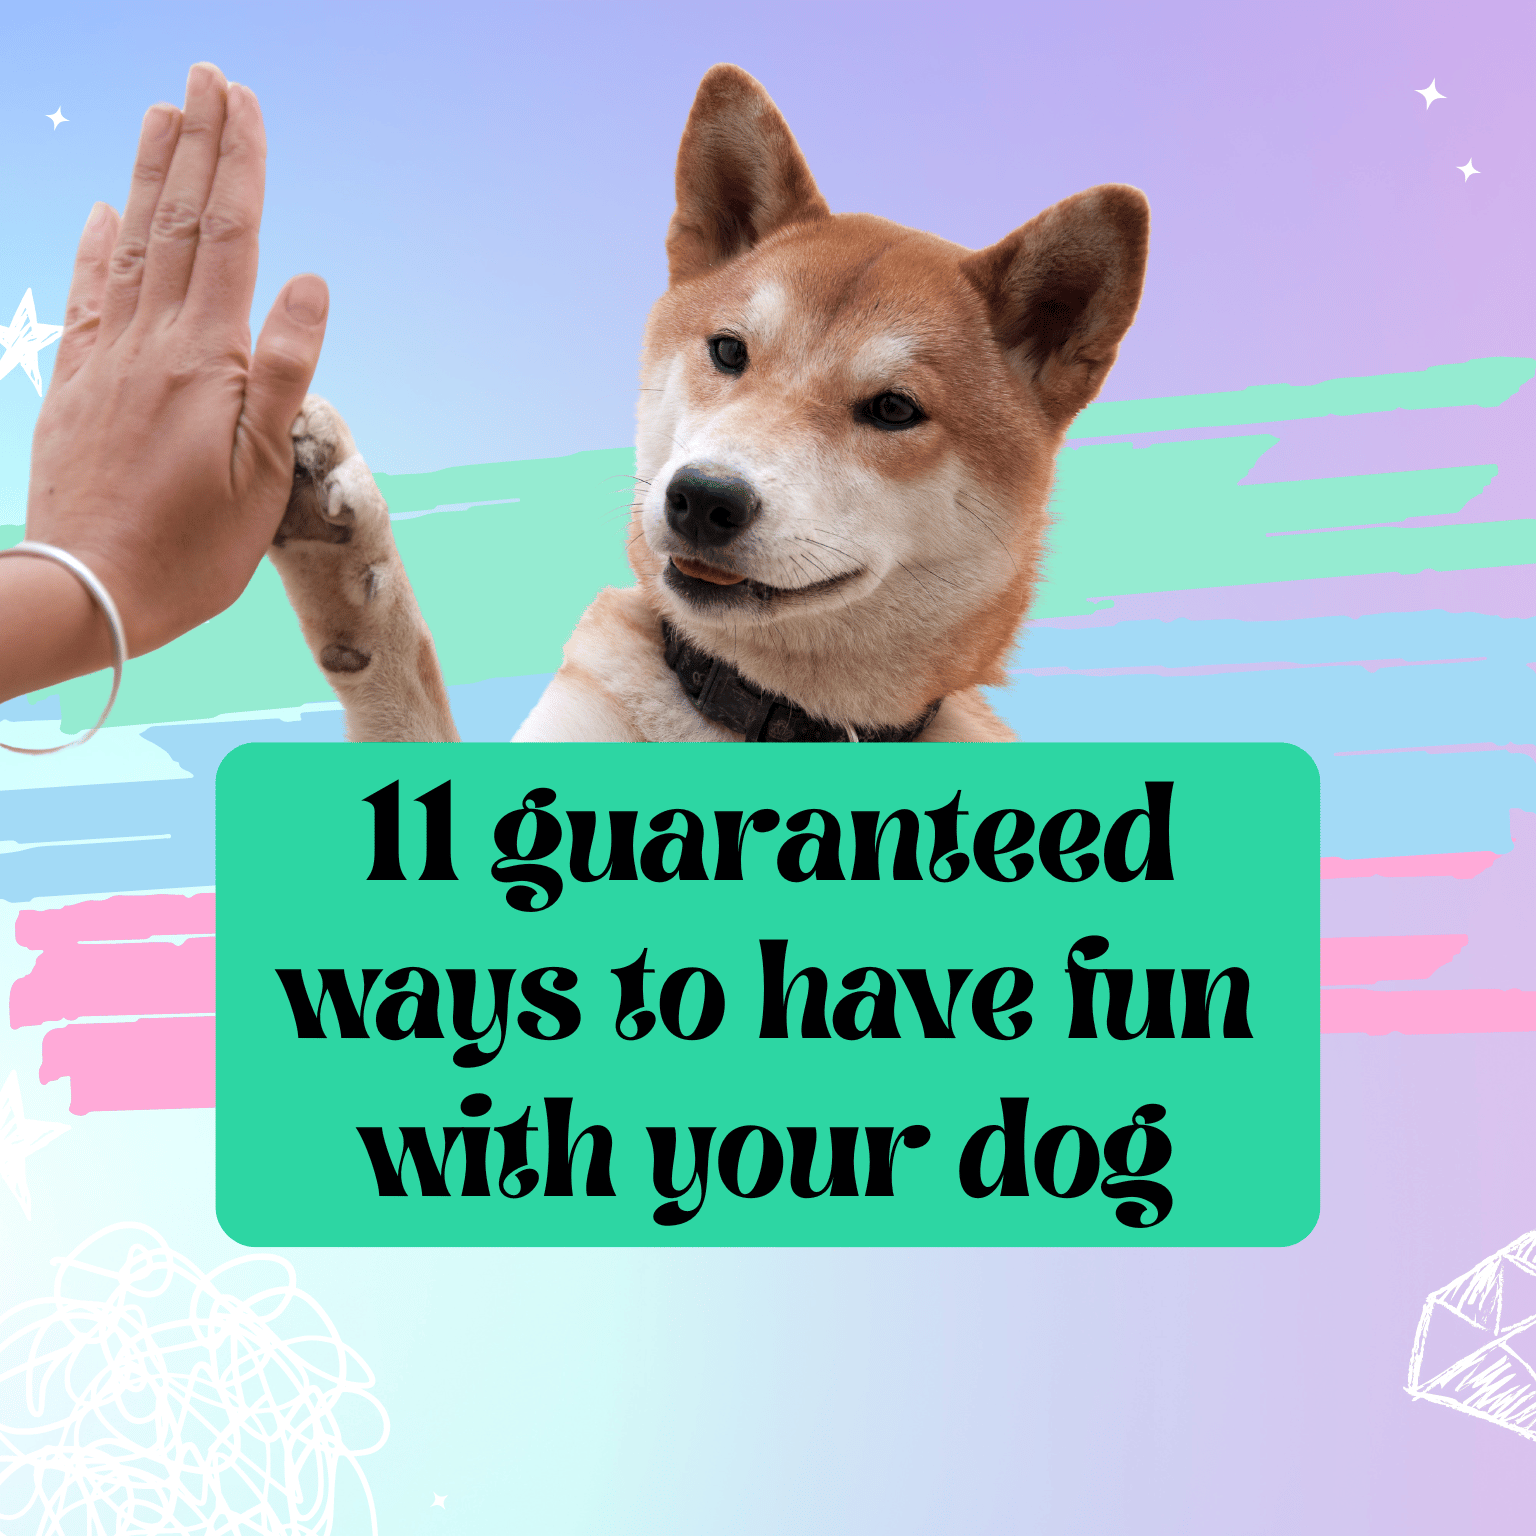 Dog holding his paw up against a human hand on a blog post picture about ways to have fun with your dog